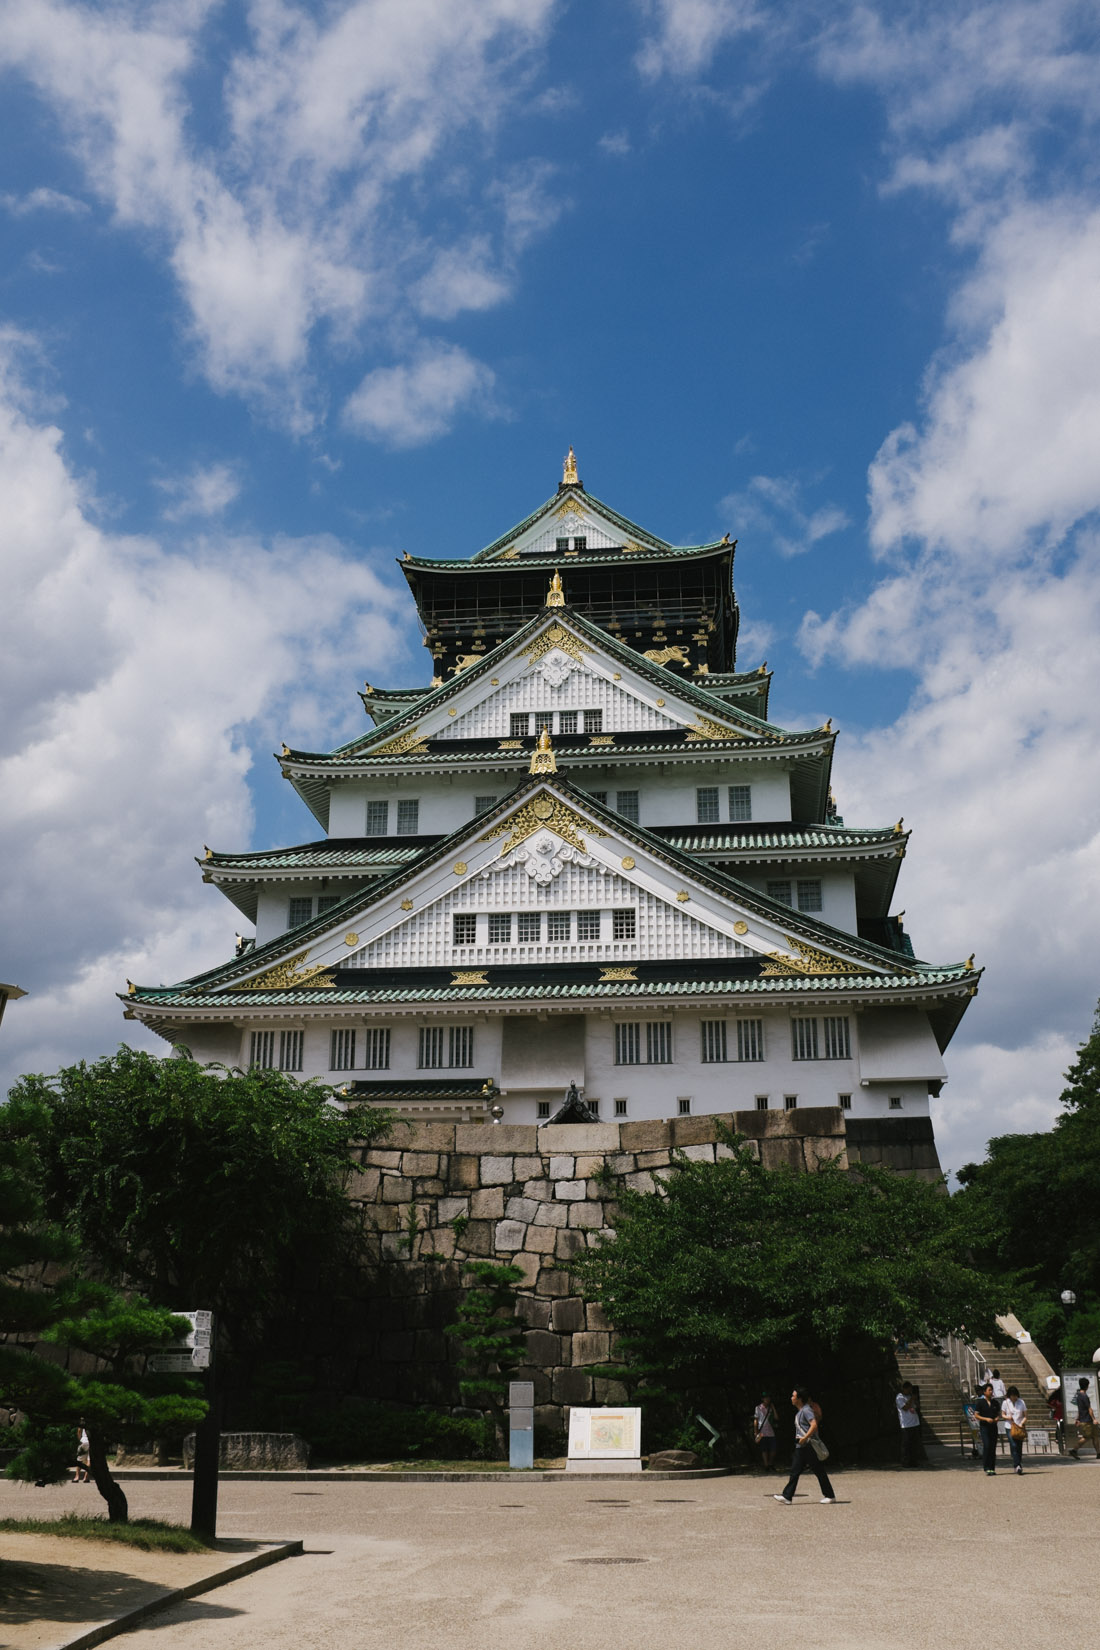 Osaka-jo in all its greatness and beauty. This is one of the most important castles in Japan, playing a major role in the unification of the country in the sixteenth century.